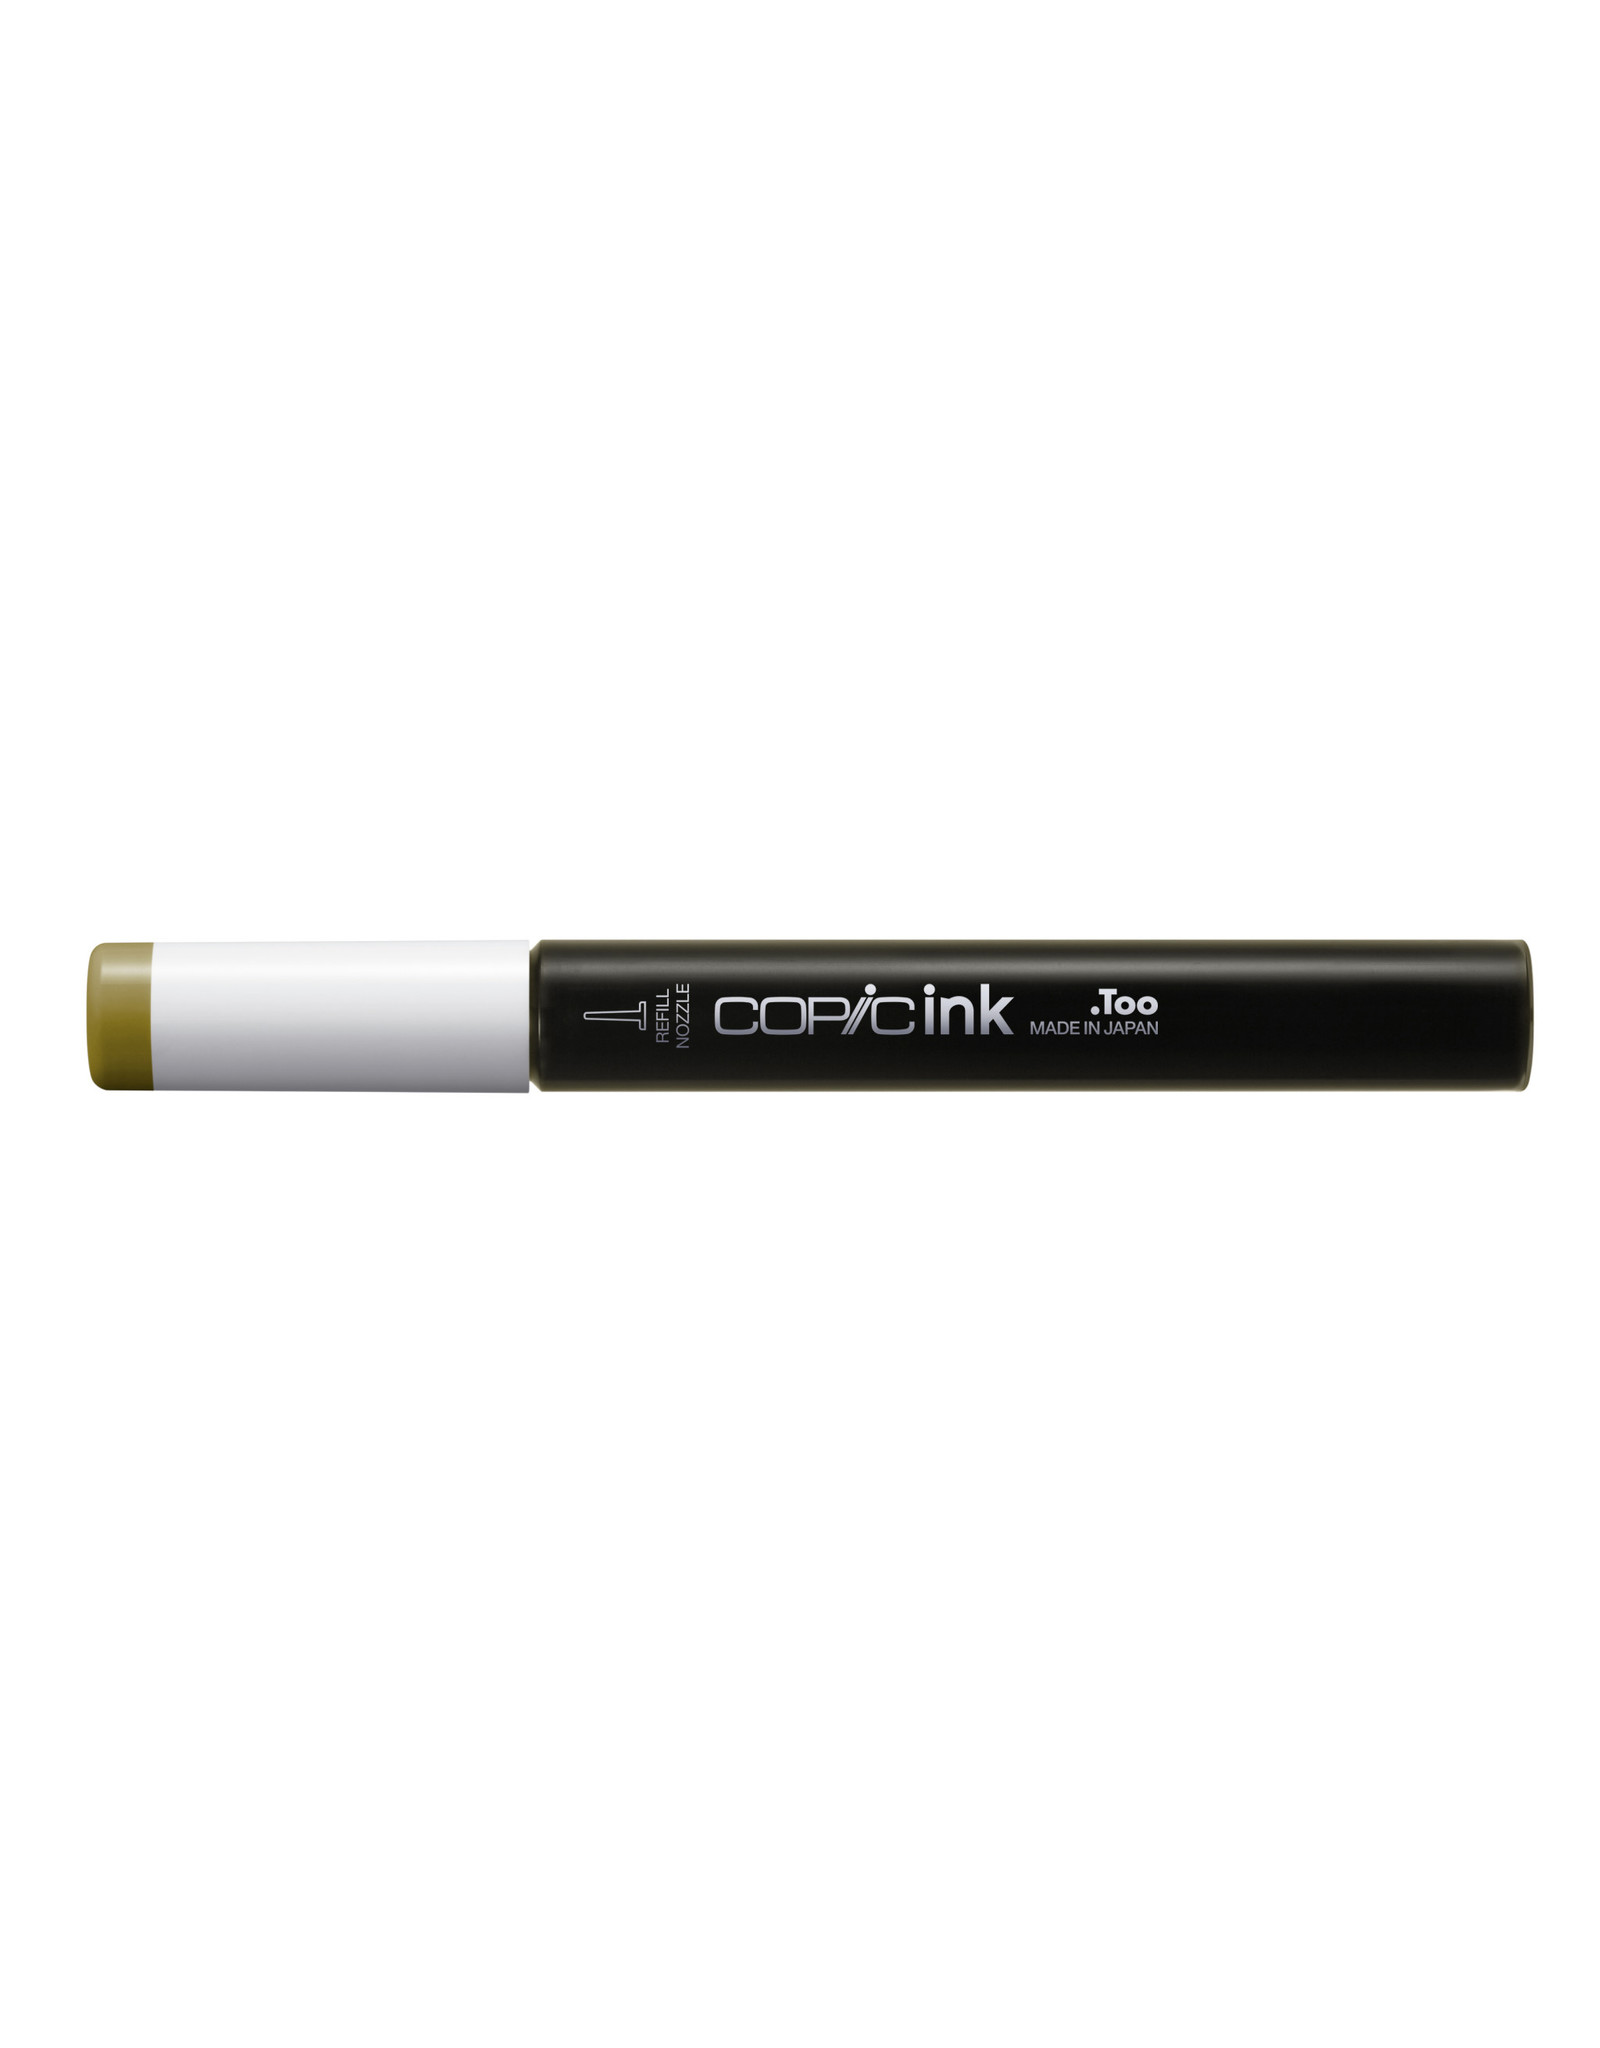 COPIC COPIC Ink 12ml YG95 Pale Olive